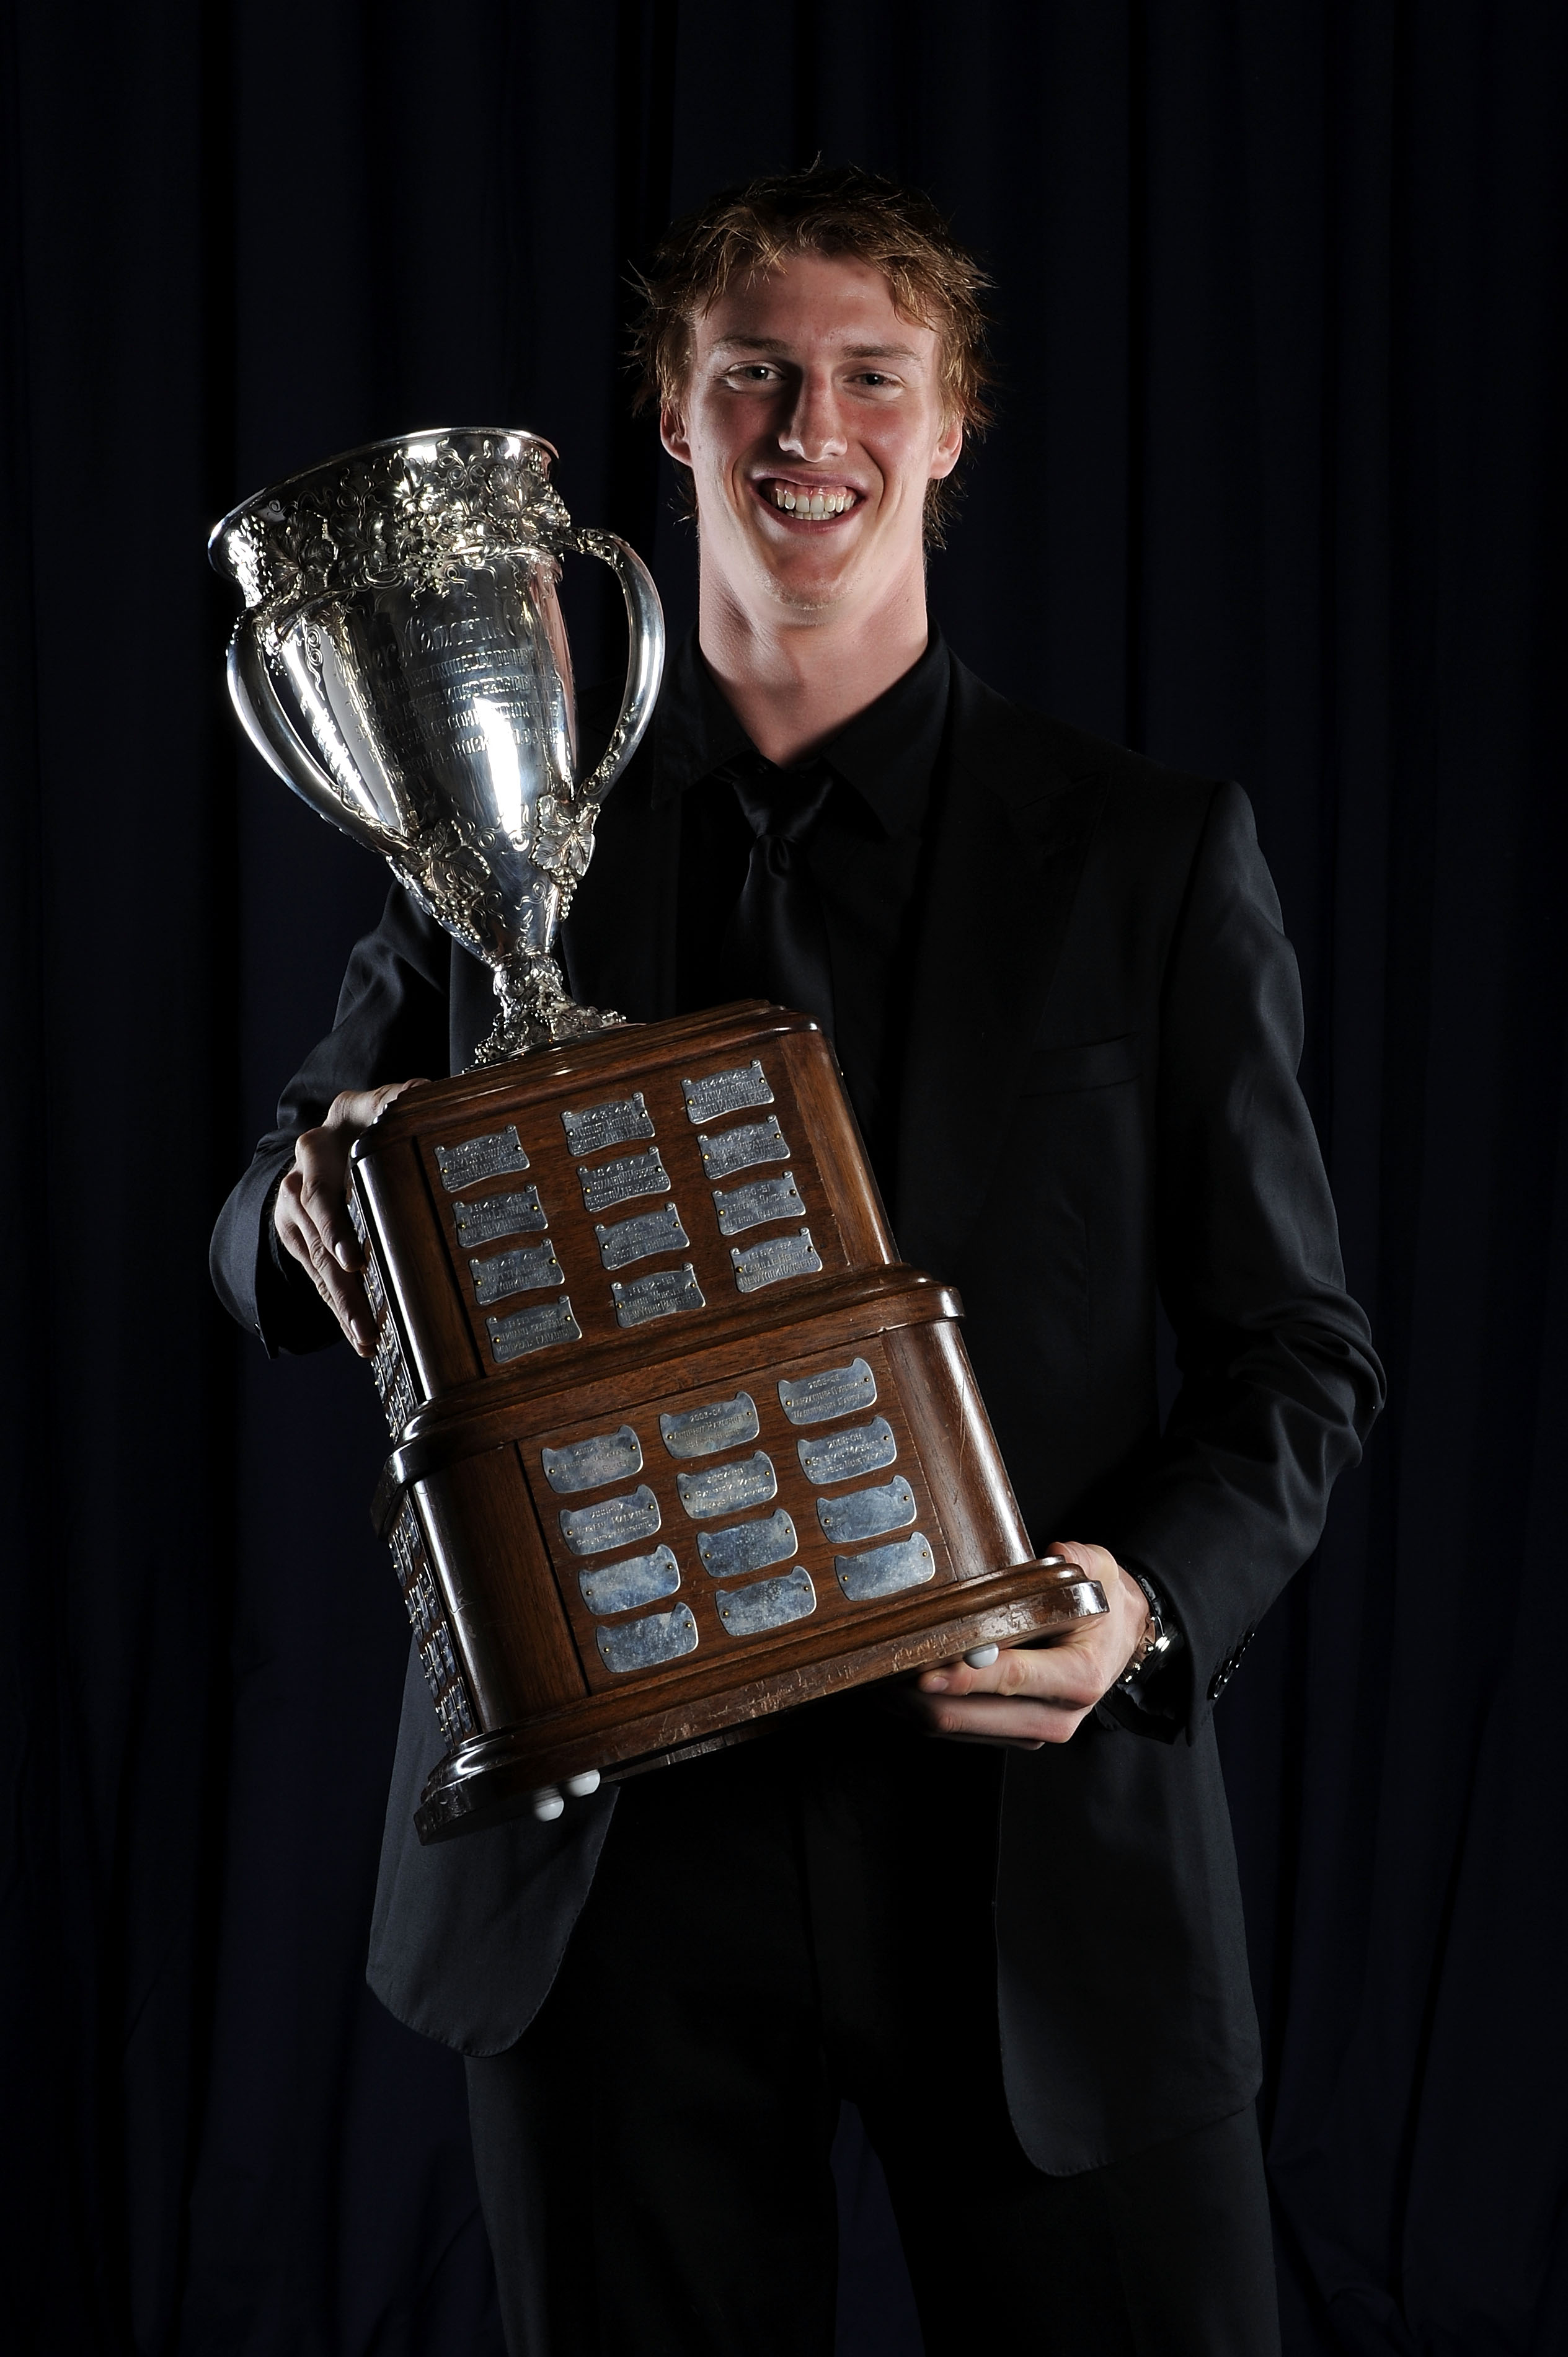 LAS VEGAS - JUNE 23:  Tyler Myers of the Buffalo Sabres poses with the Calder Trophy for a portrait during the 2010 NHL Awards at the Palms Casino Resort on June 23, 2010 in Las Vegas, Nevada.  (Photo by Harry How/Getty Images)